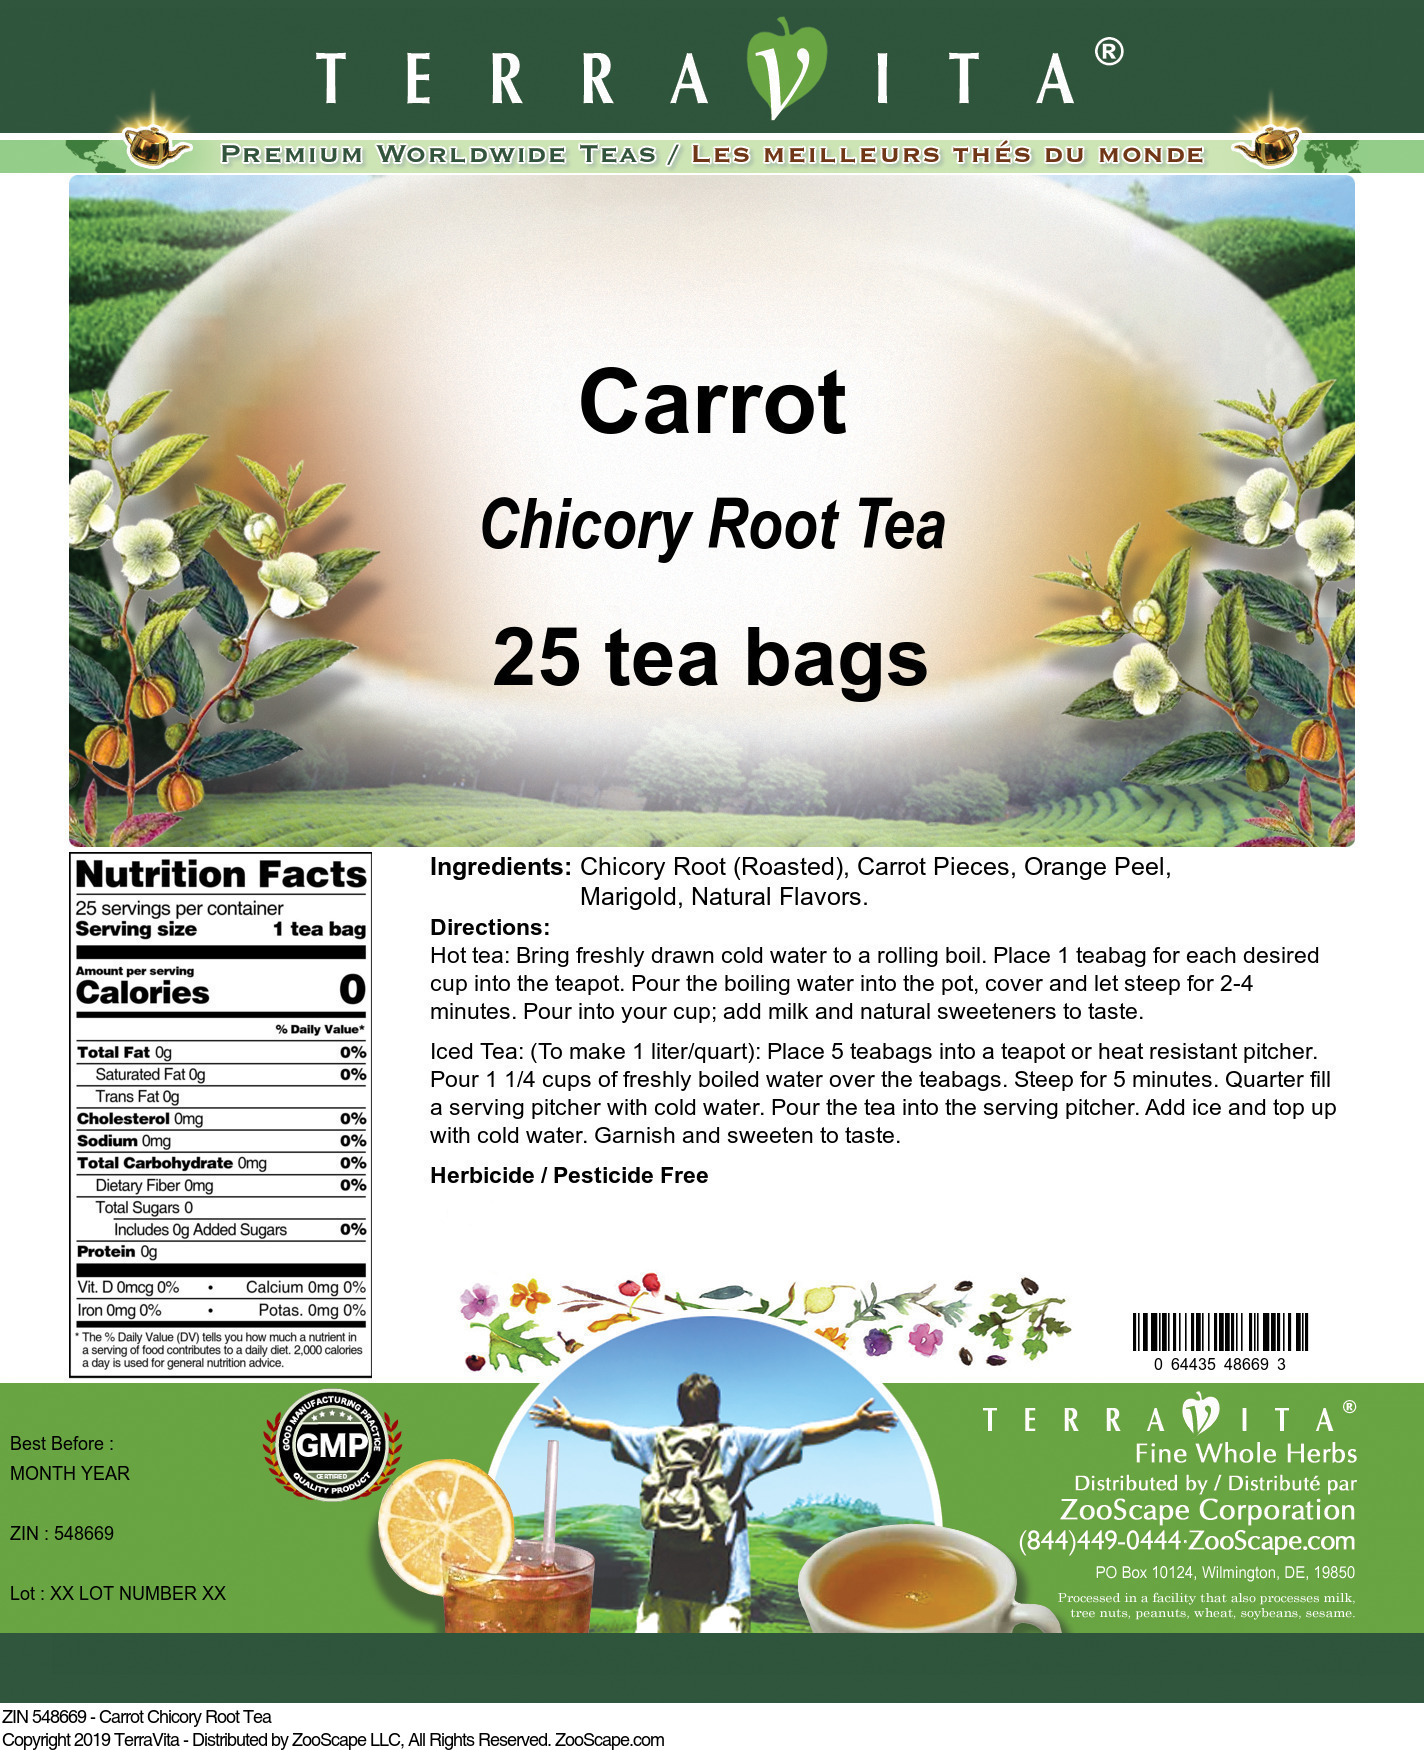 Carrot Chicory Root Tea - Label